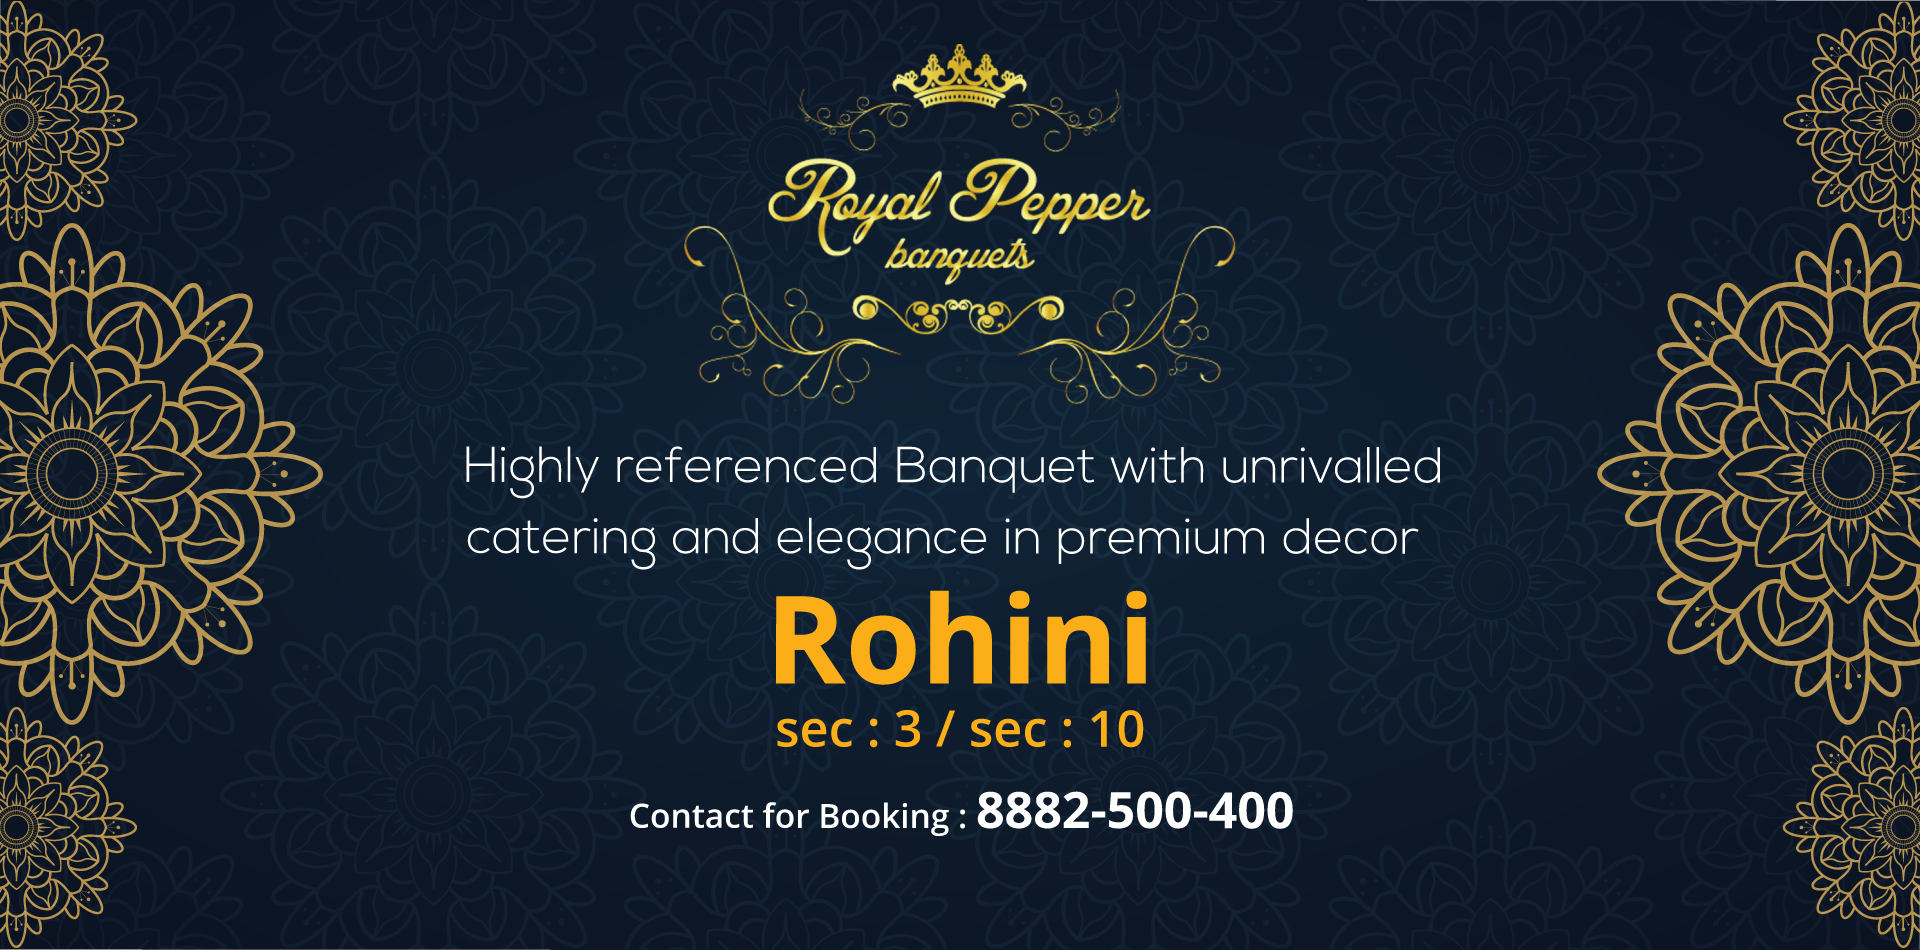 banquets in rohini, Banquet Hall in rohini, By Royal Pepper Banquets